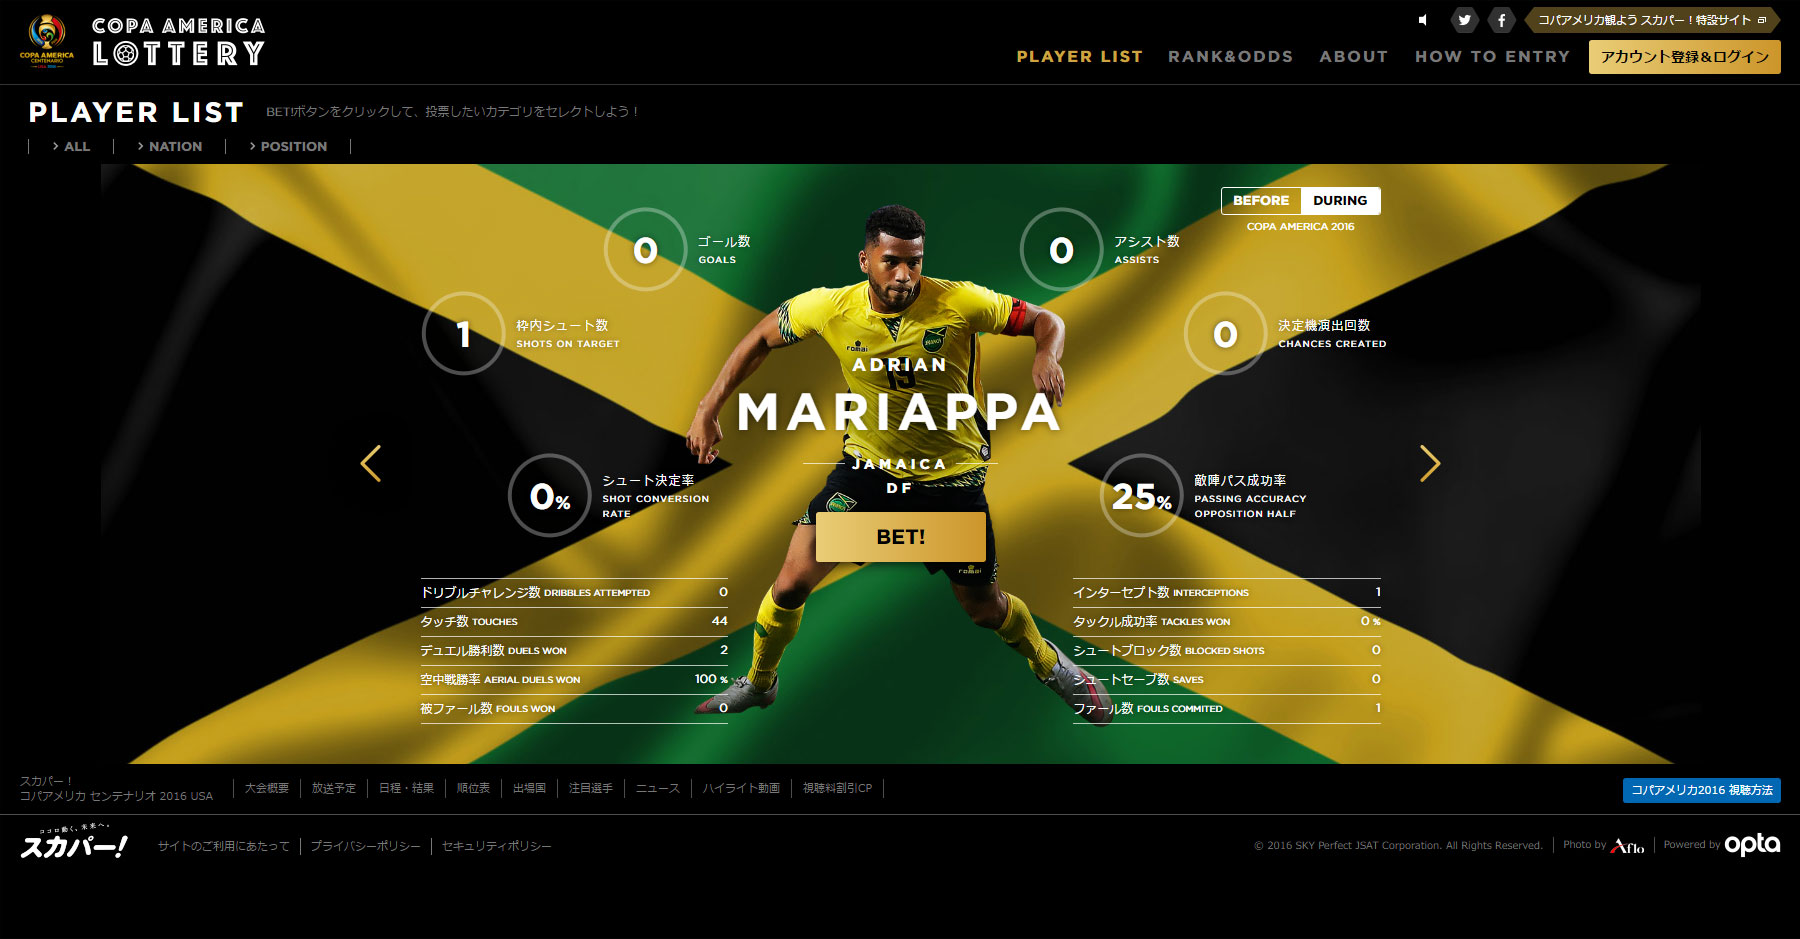 COPA AMERICA LOTTERY - Website of the Day